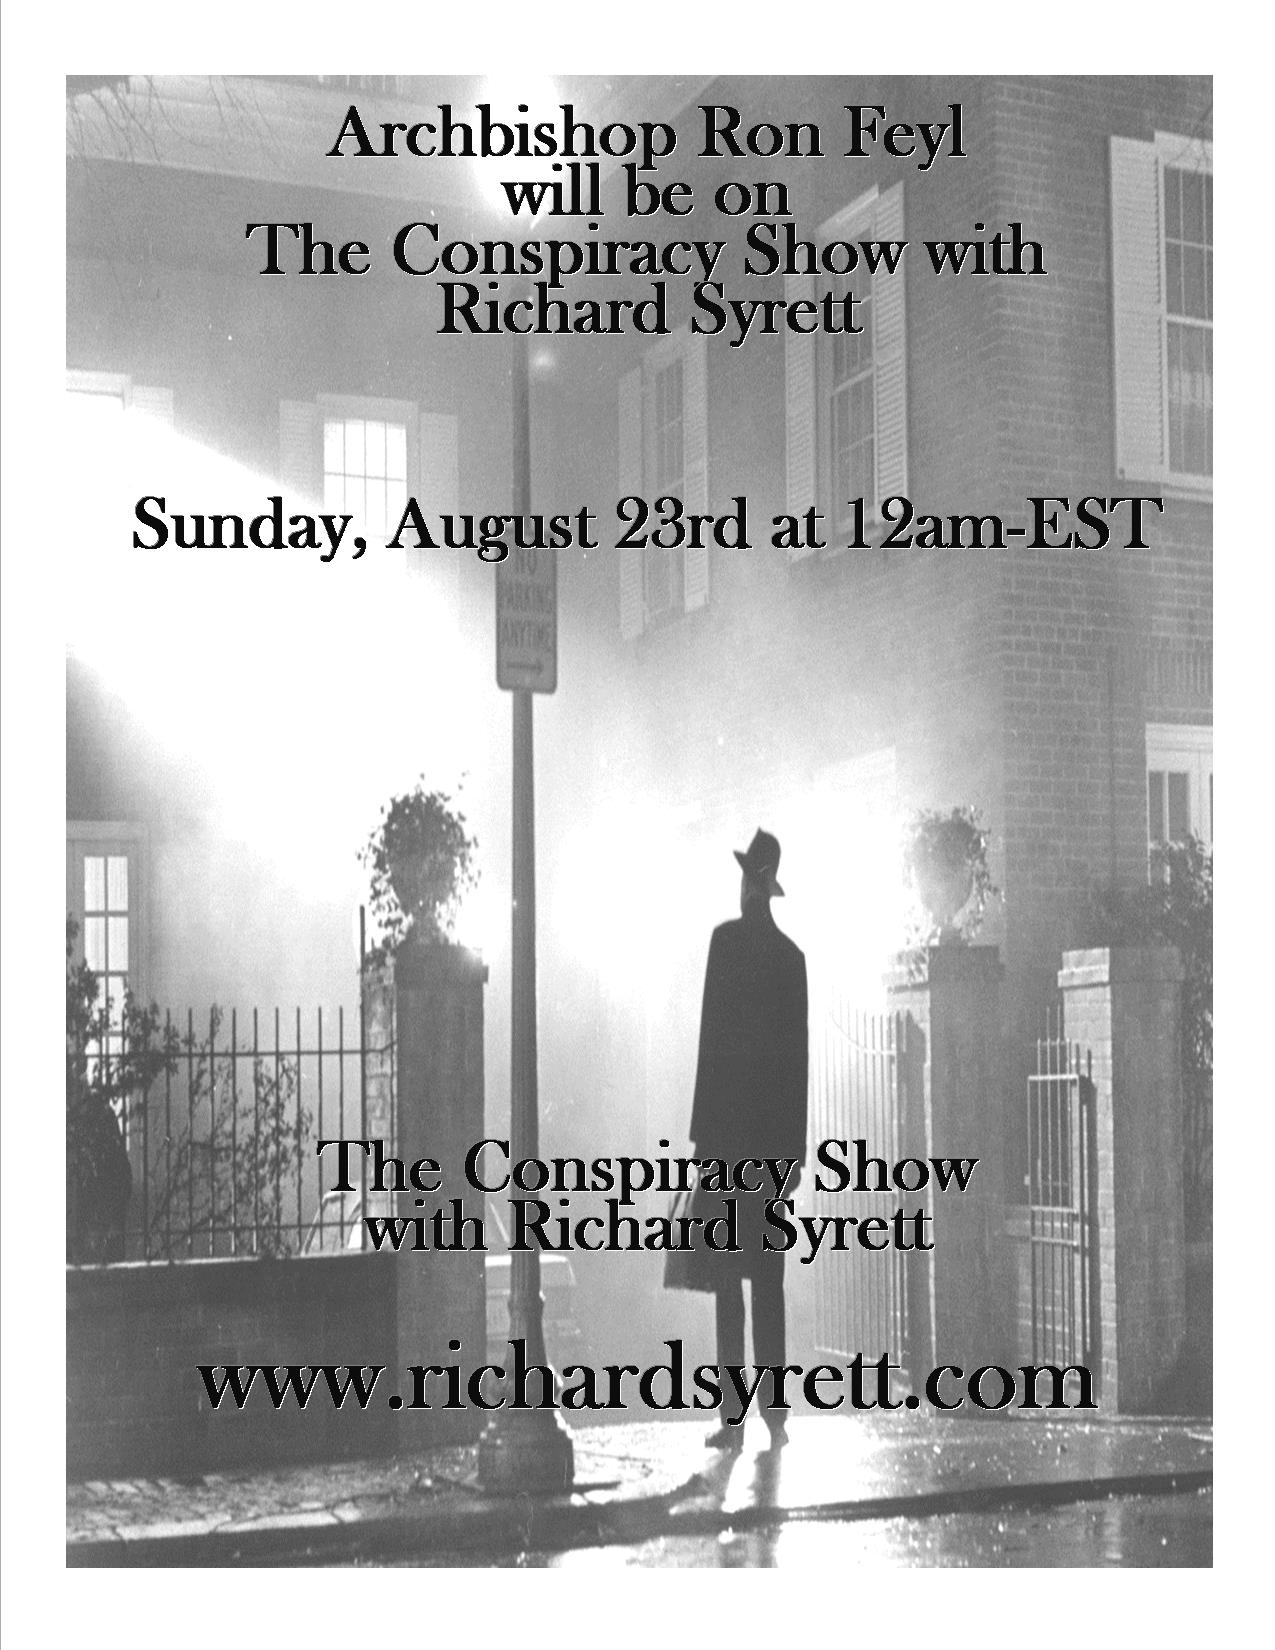 The Conspiracy Show Image